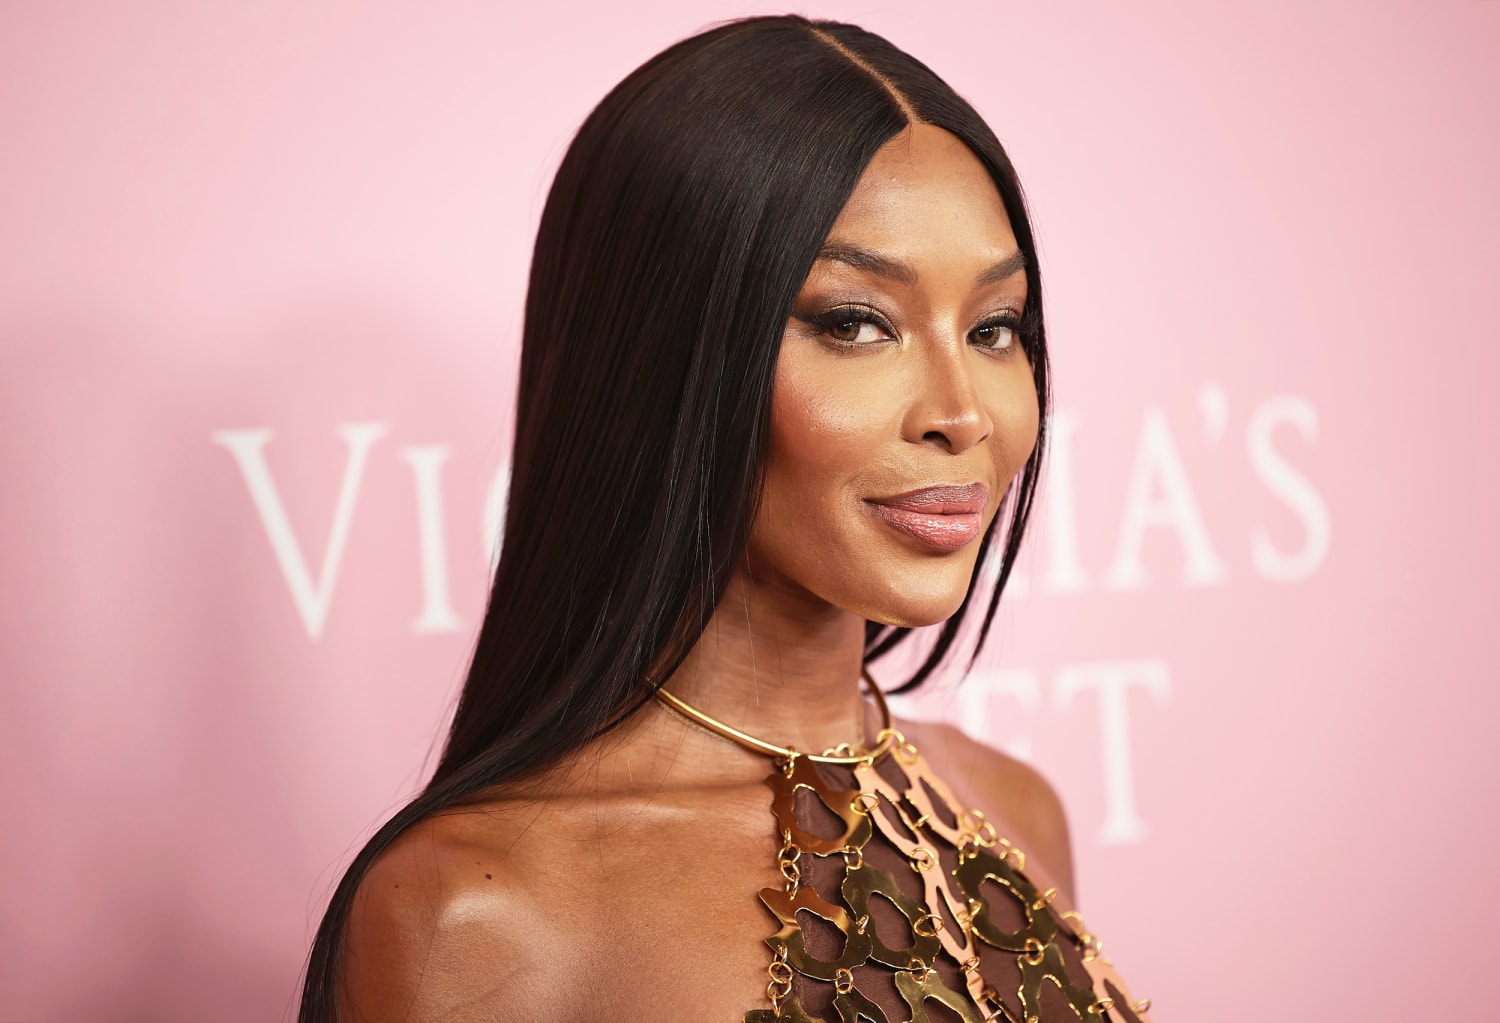 Naomi Campbell opens up about being a mom of newborn and 2-year-old at 53